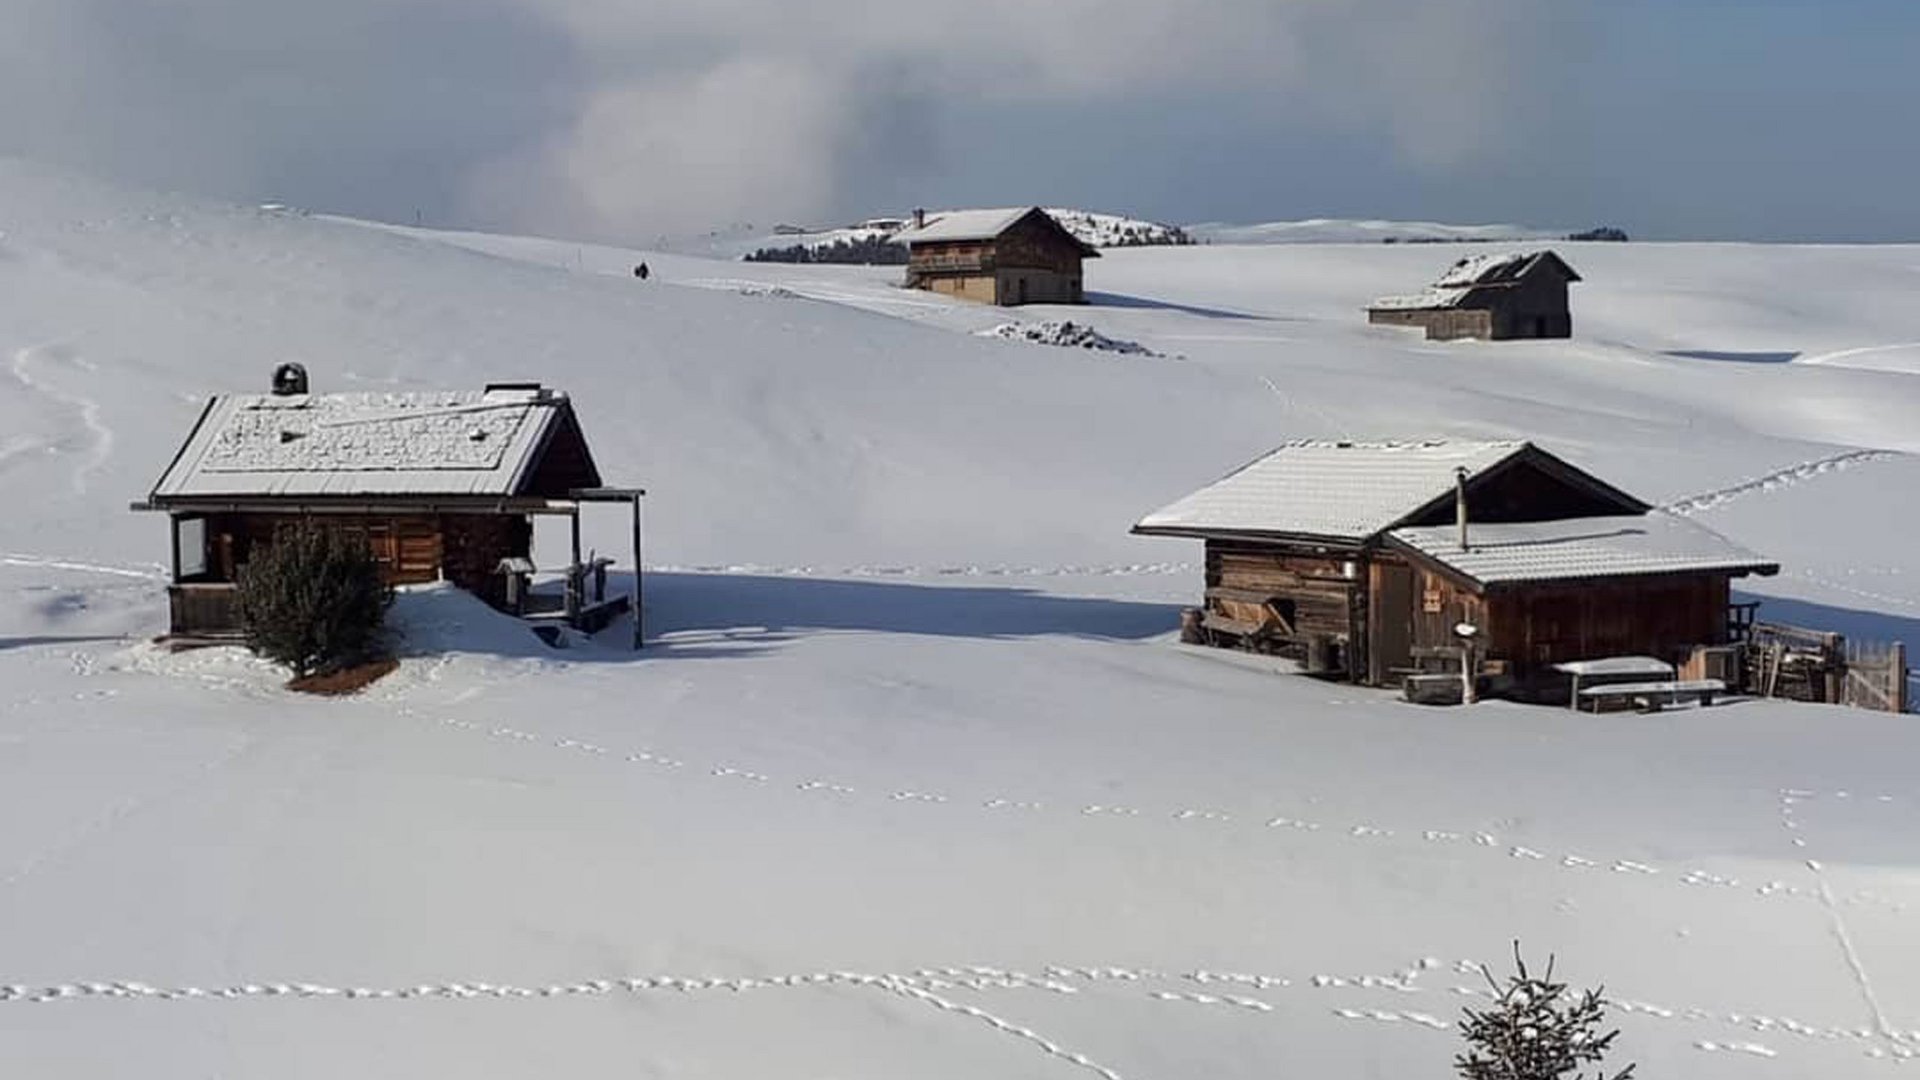 A winter holiday on the Alpe di Suisi/Seiser Alm